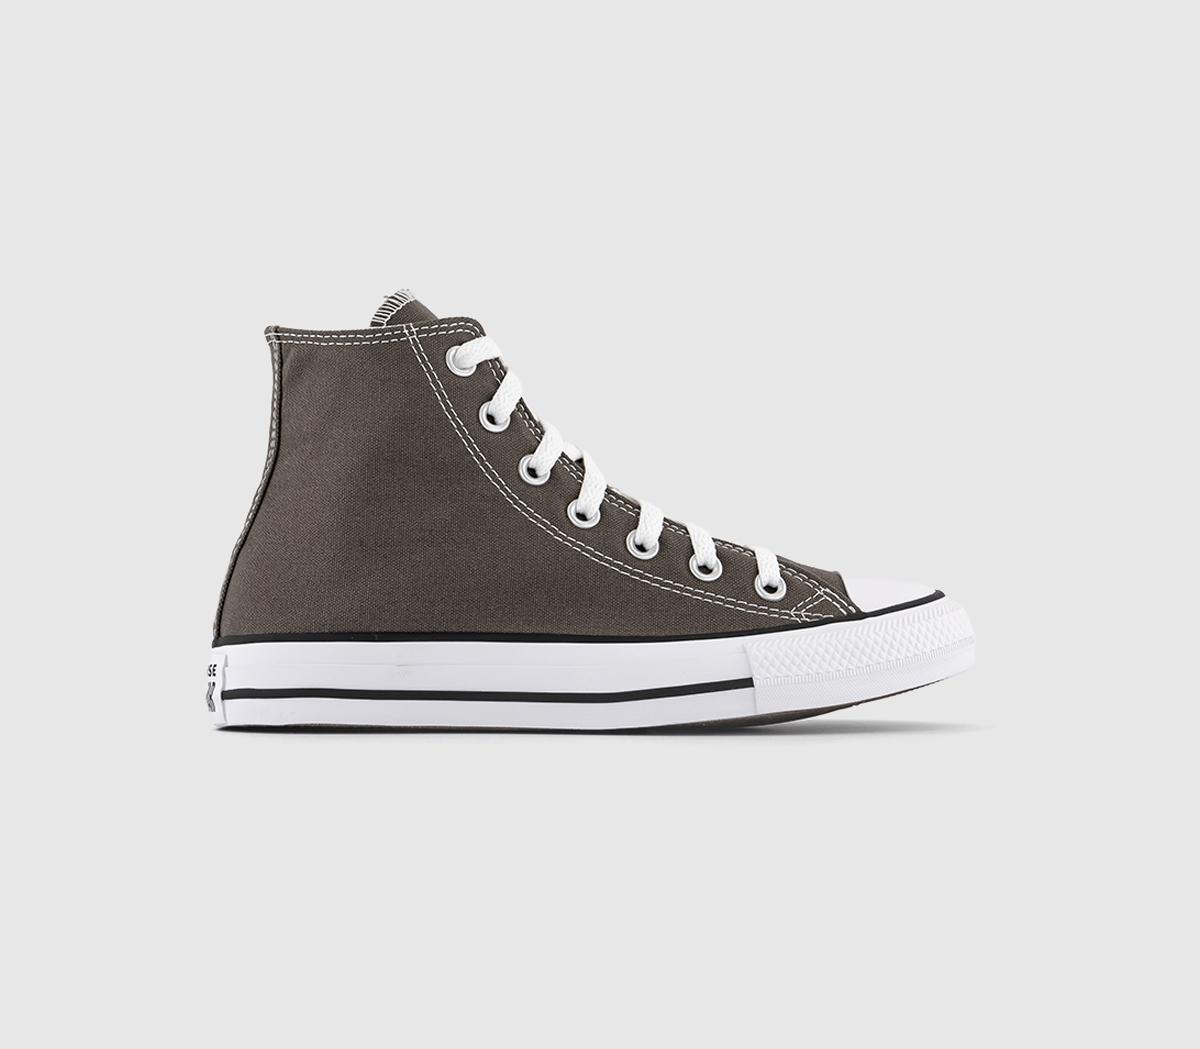 Converse All Star Hi Trainers Charcoal - Unisex Sports